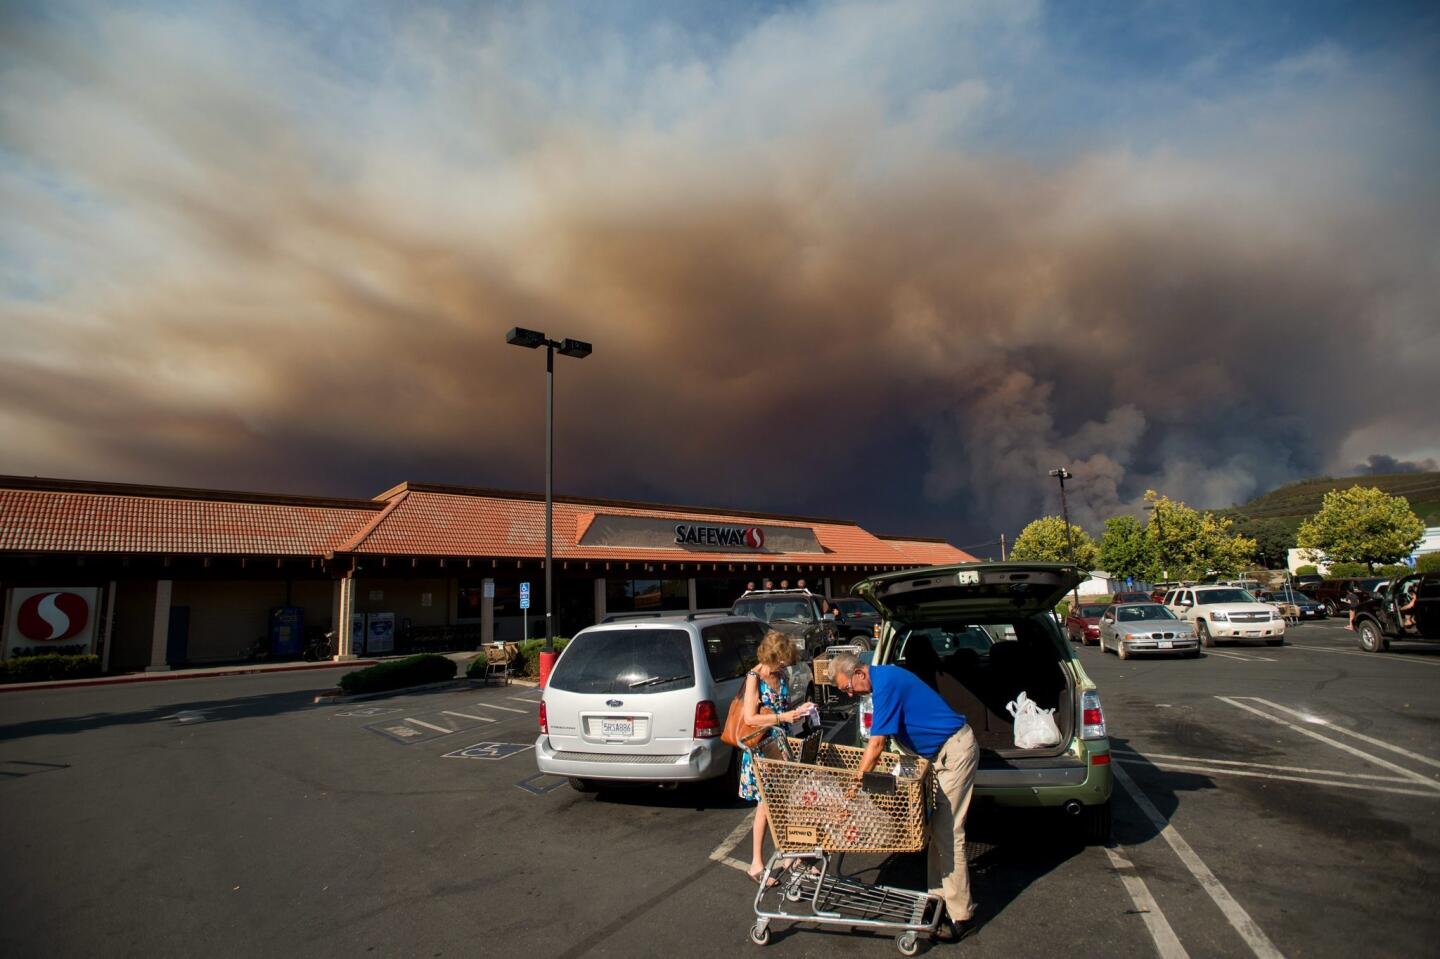 Rocky fire in Northern California